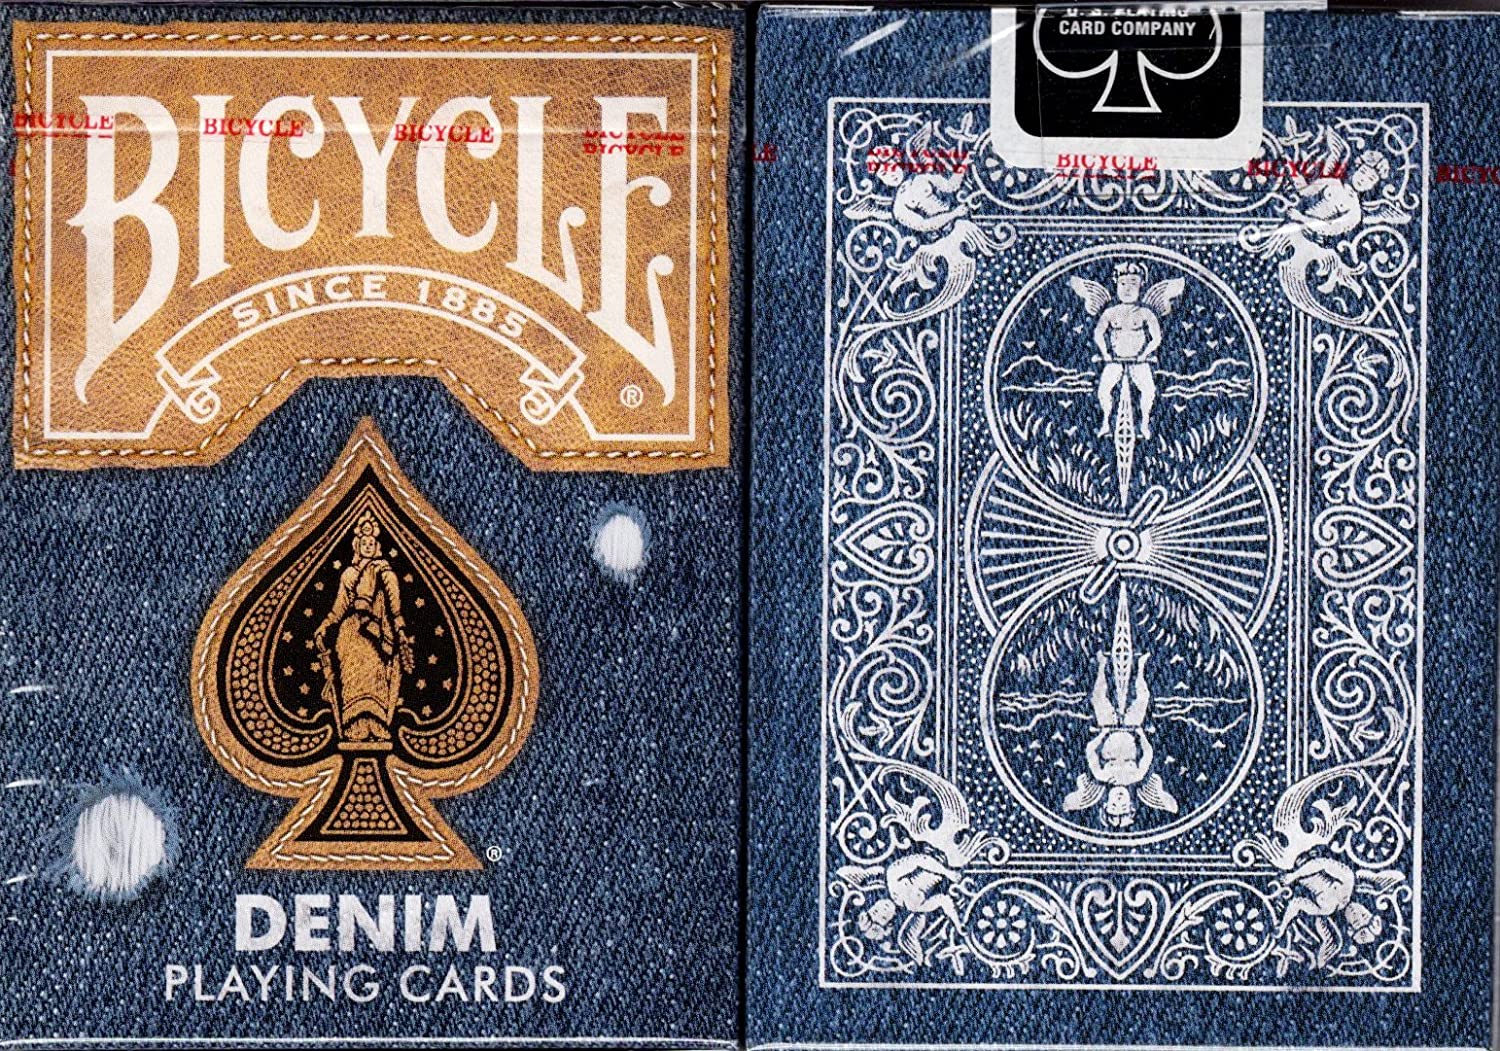 Vintage Classic Bicycle Playing Cards Poker Size Deck USPCC Custom Limited New 